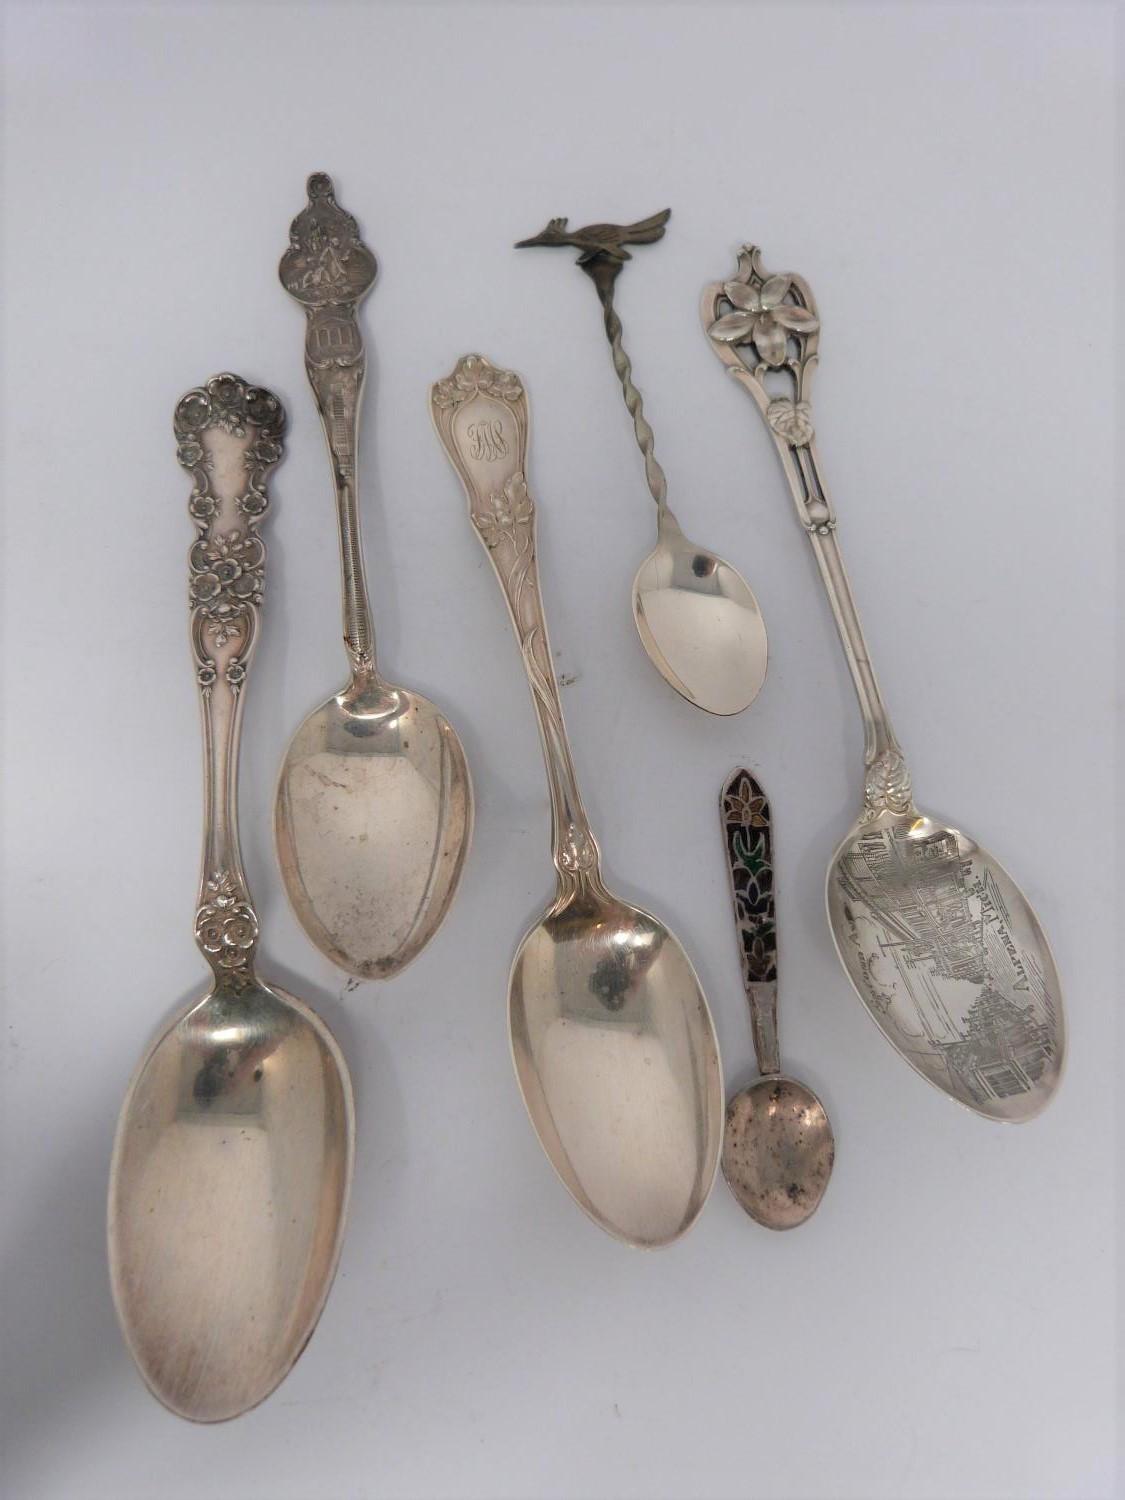 A collection of silver spoons, including tourist and collector's spoons. (411g). - Image 6 of 6